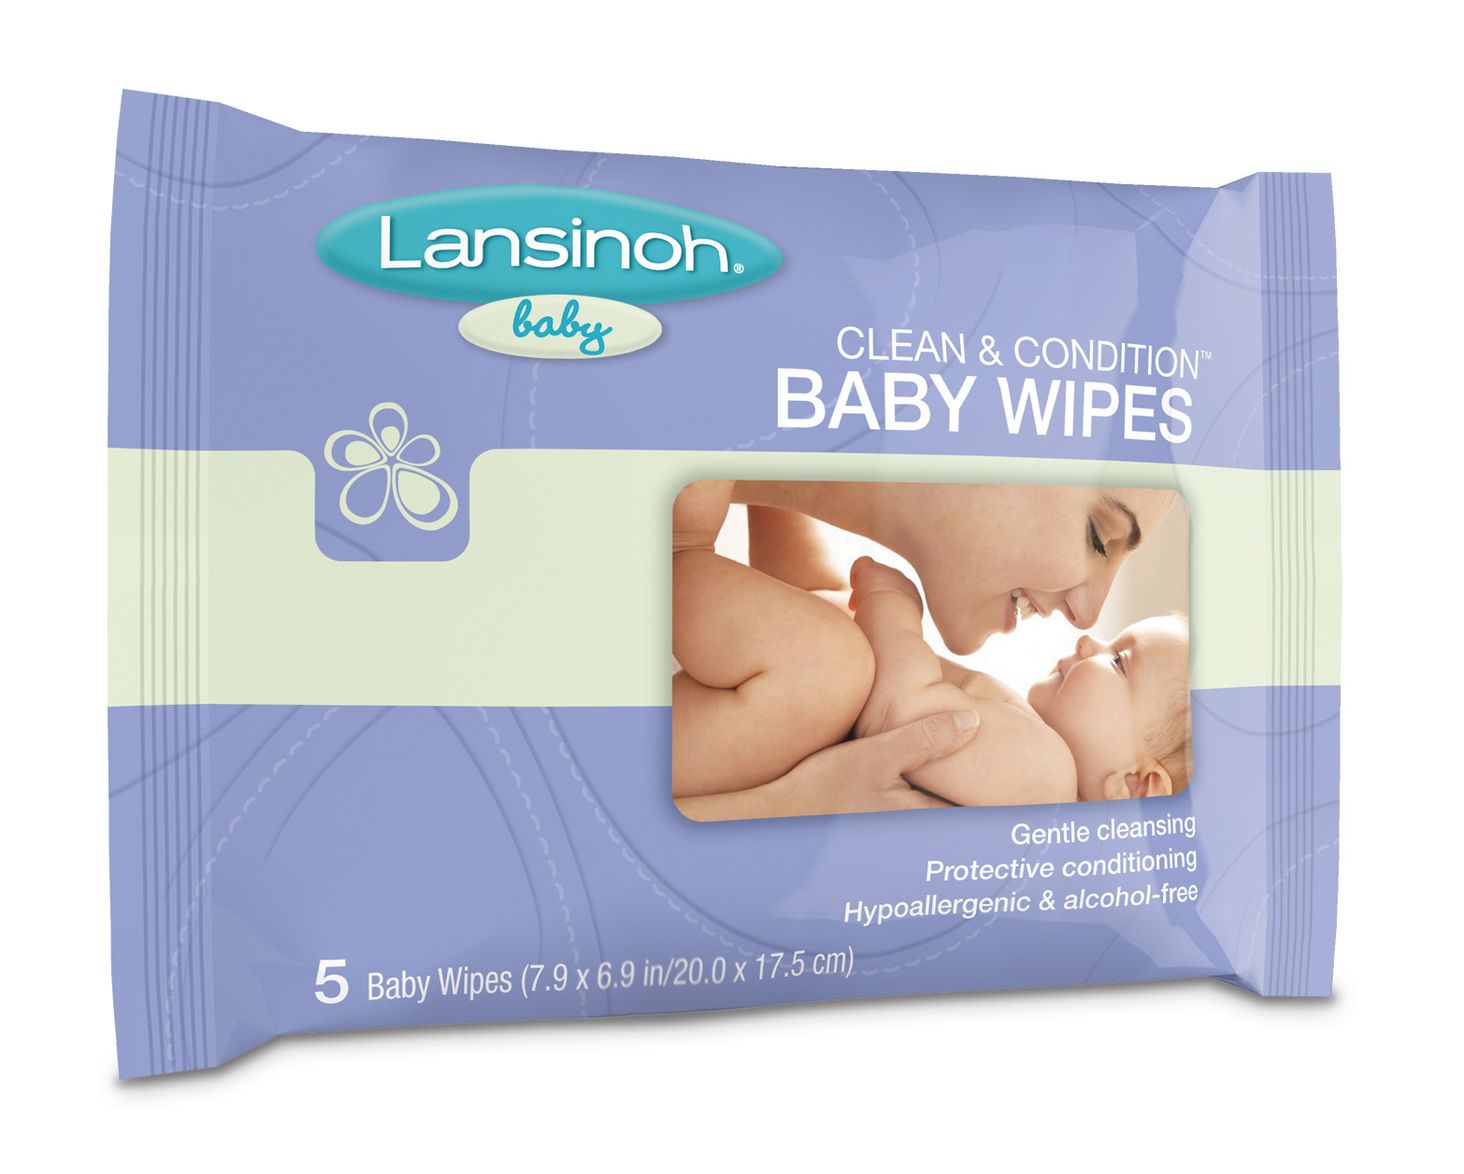 pampers active baby fry 5